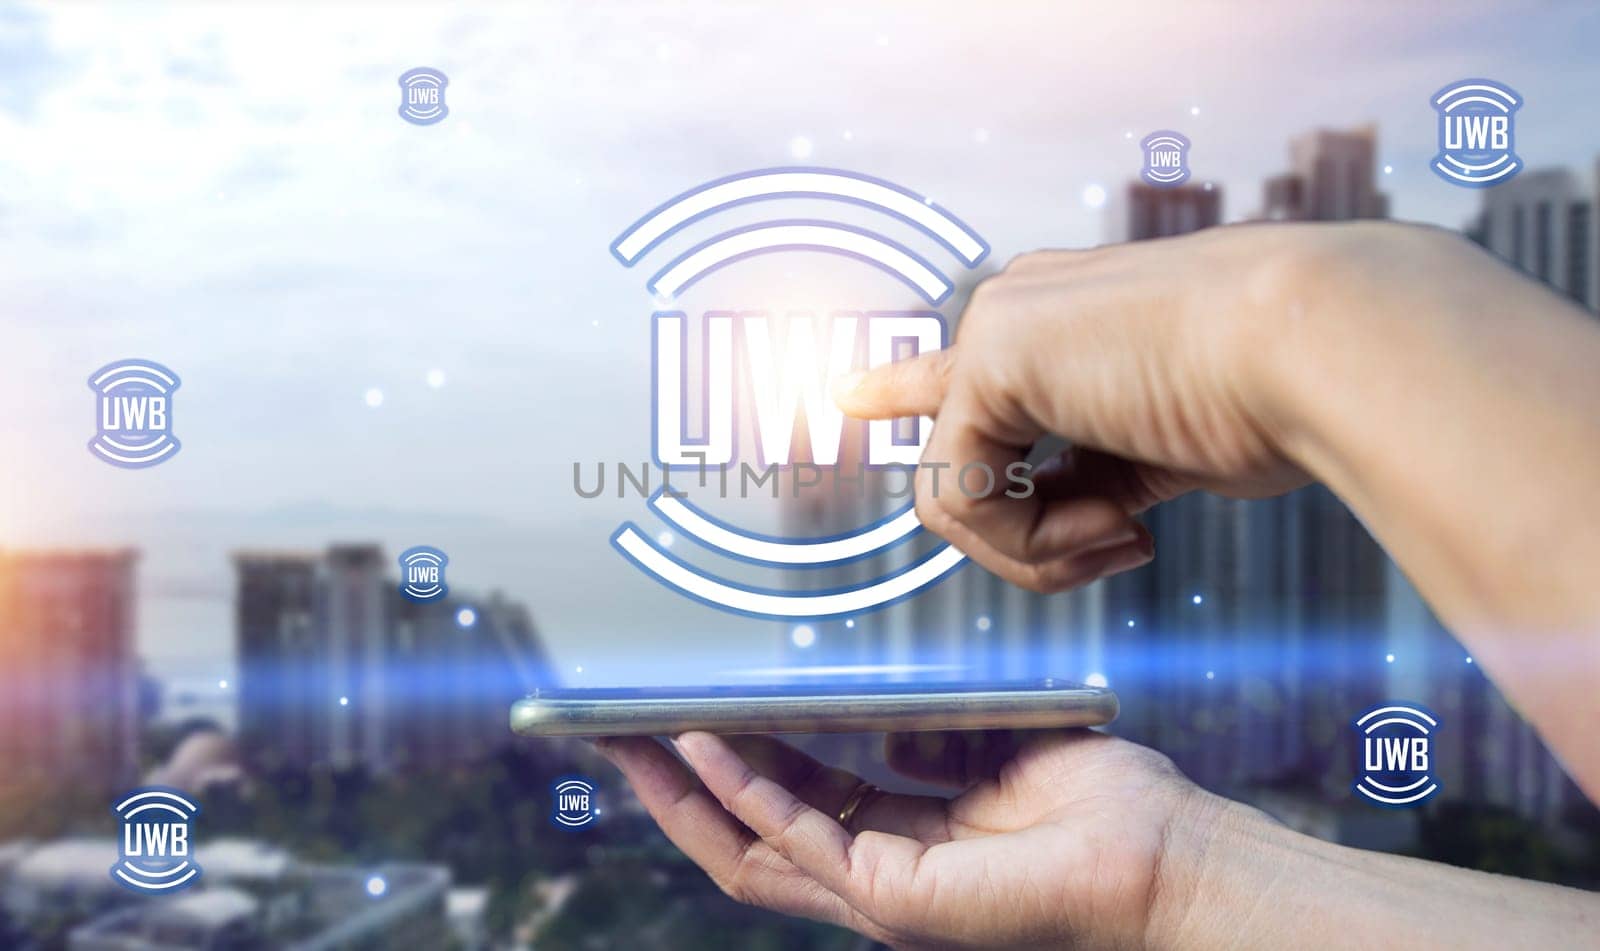 Ultra-wideband UWB is a short-range radio communication technology on bandwidths of 500MHz or greater and at very high frequencies. Overall, it works similarly to Bluetooth and Wi-Fi.